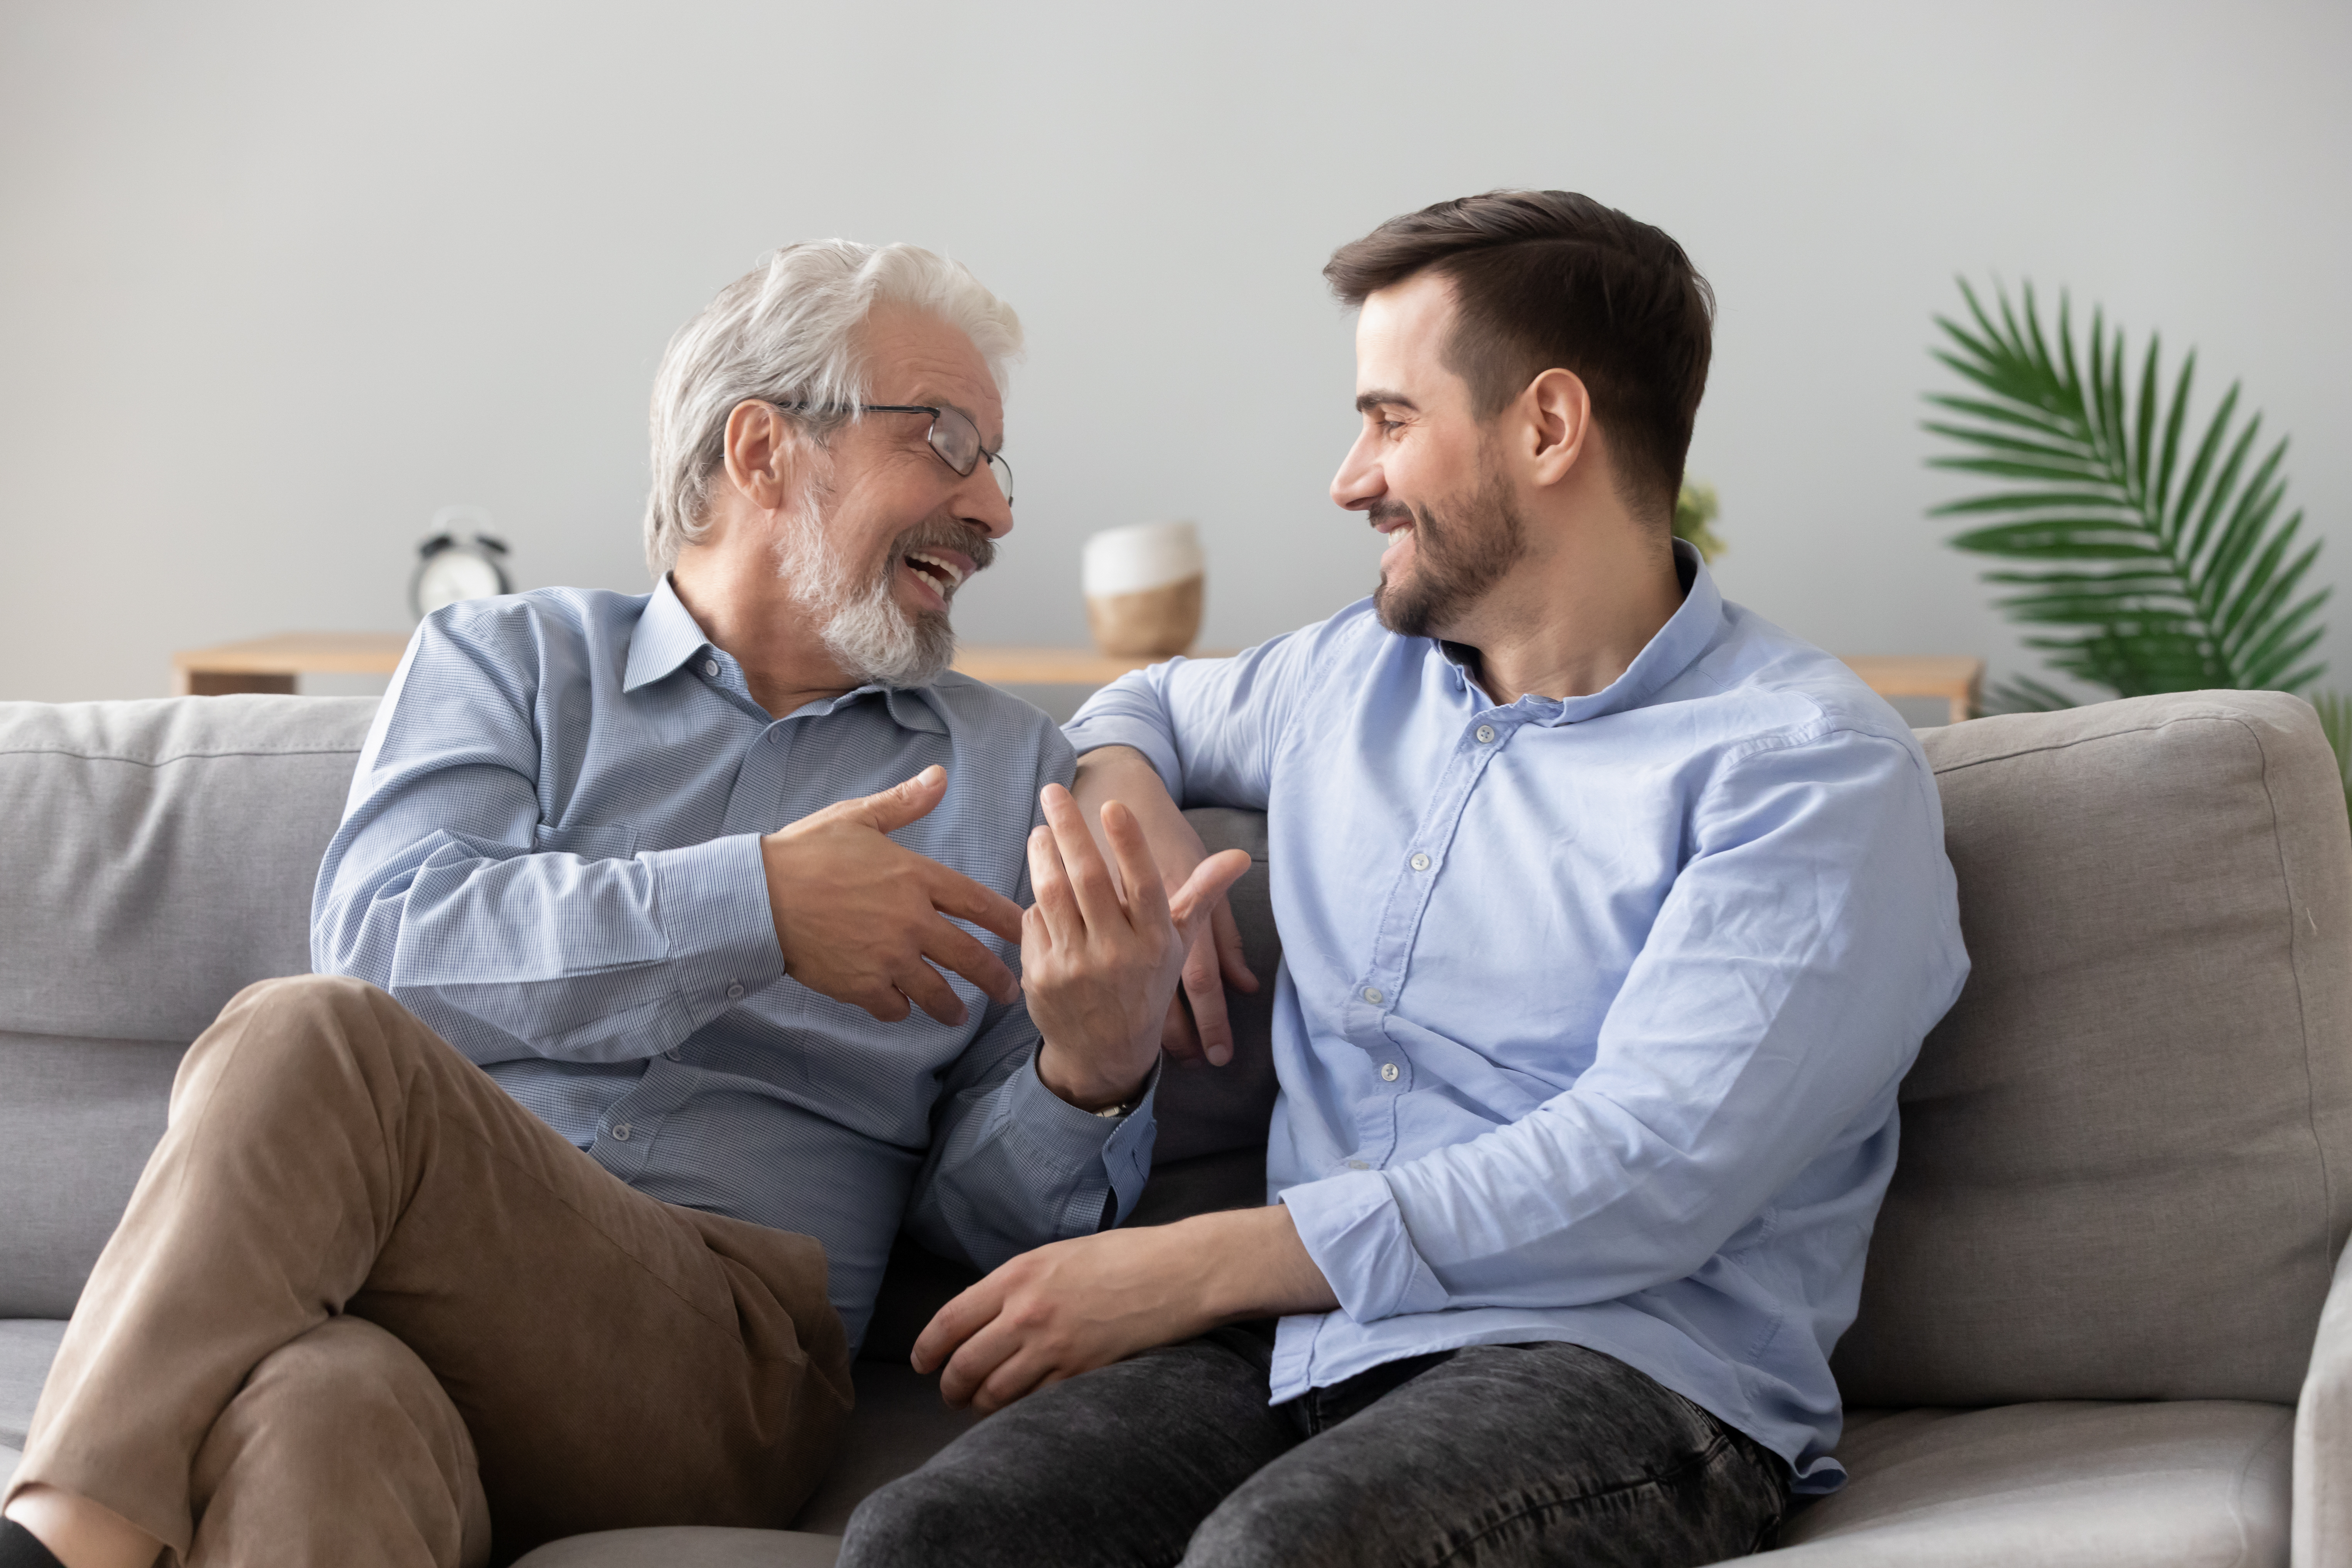 Senior dad chatting with his adult son | Source: Shutterstock